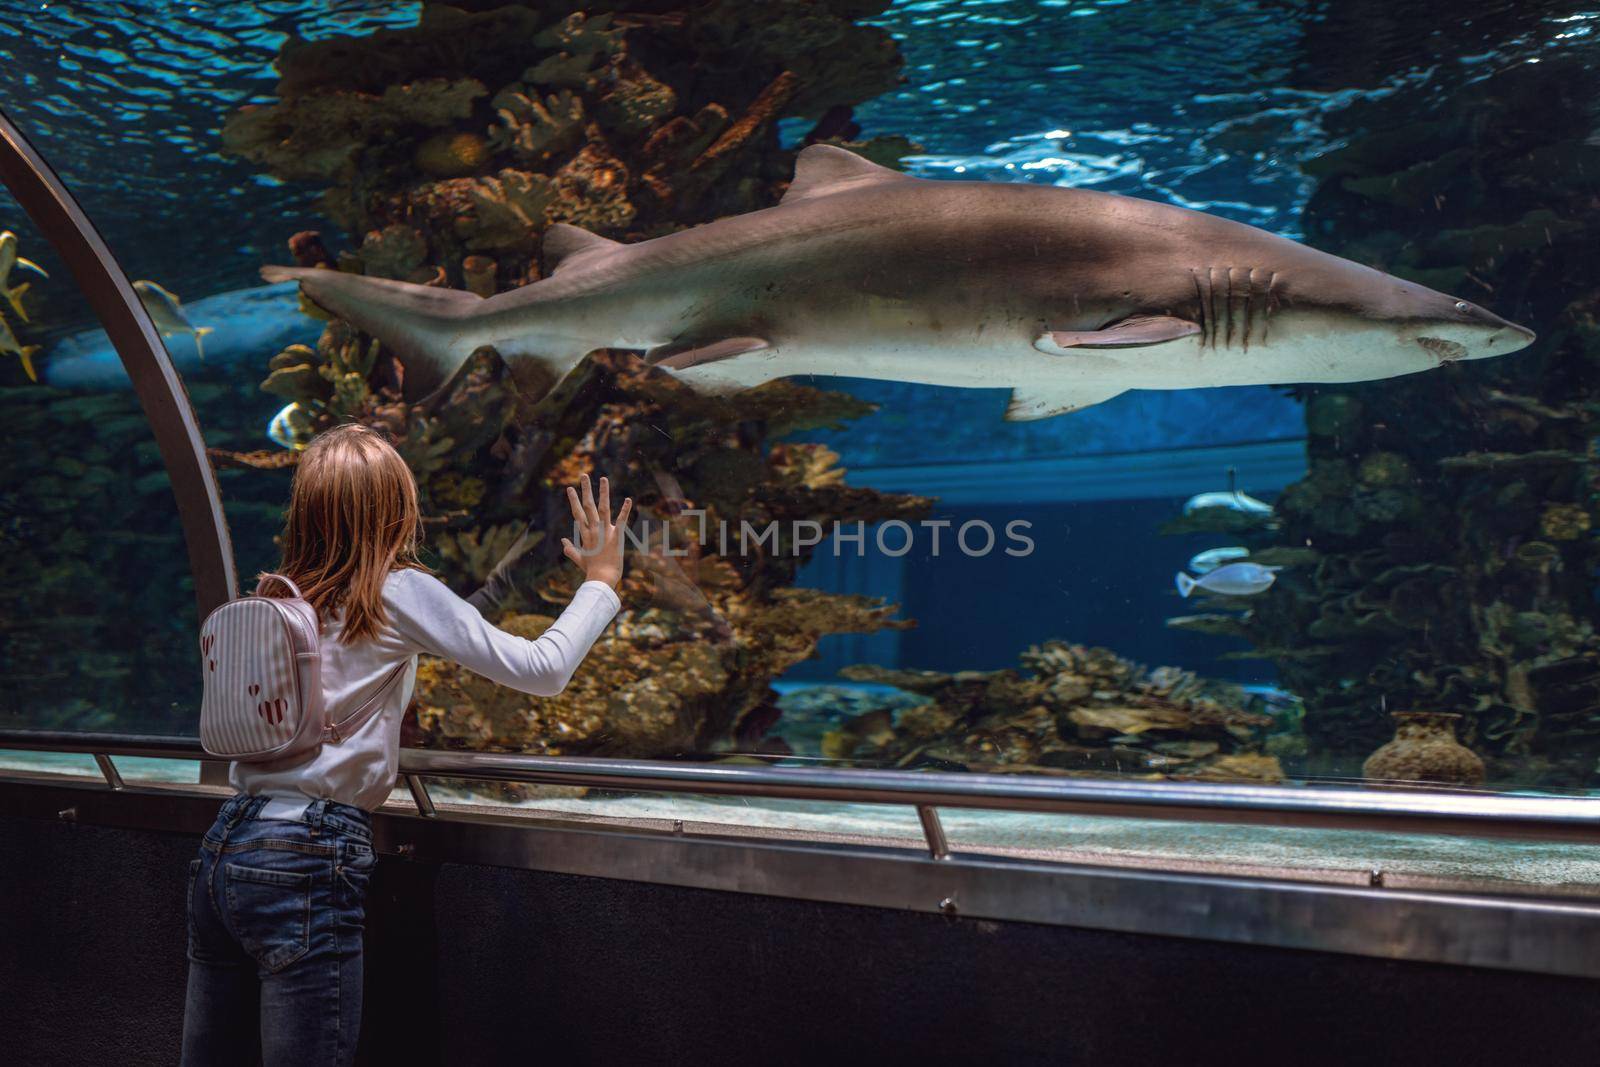 She's Fascinated By The Shark by MilanMarkovic78